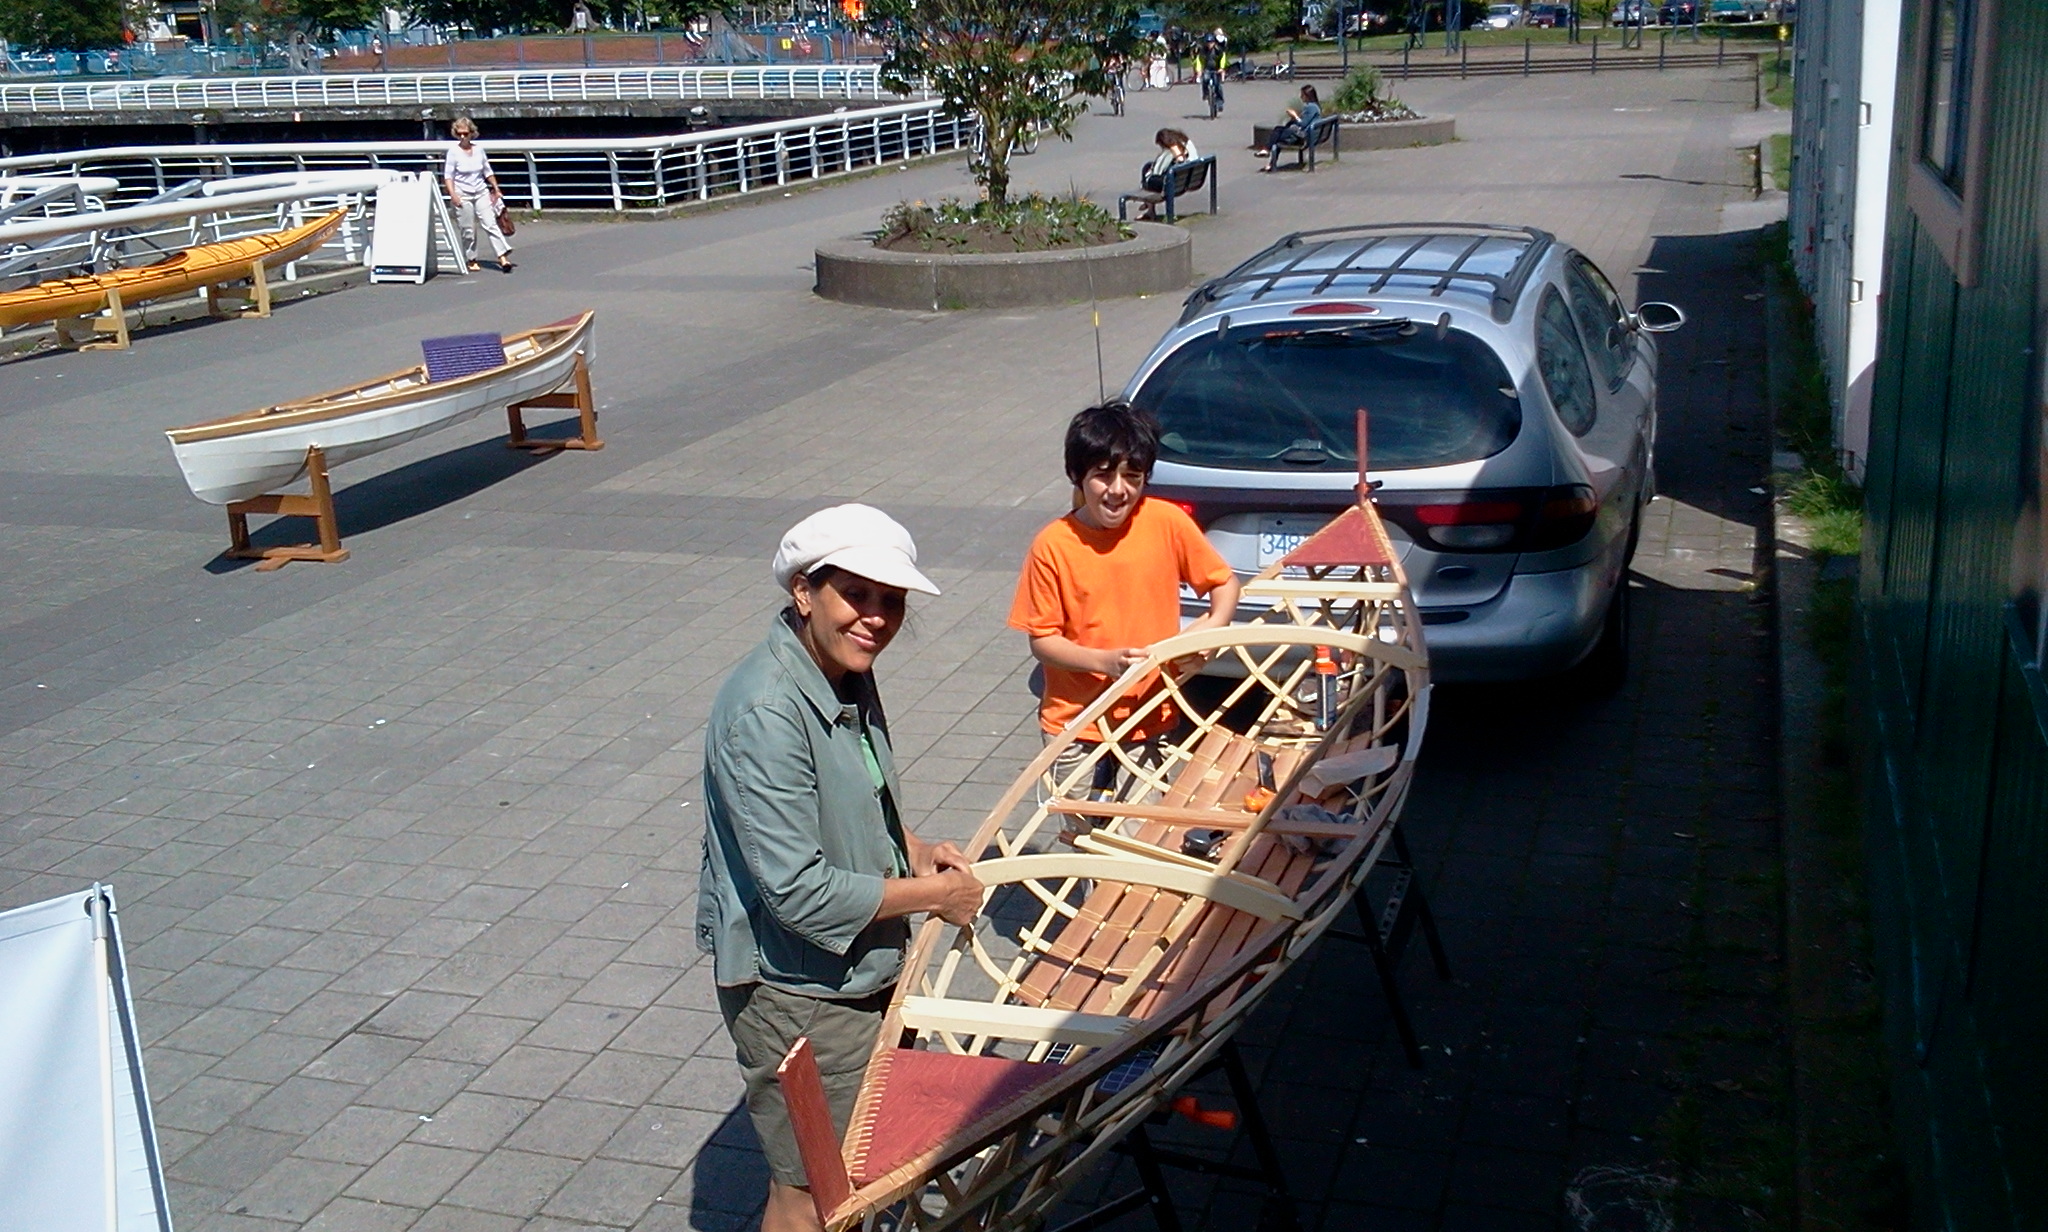  skin-on-frame one person open canoe. No previous experience necessary